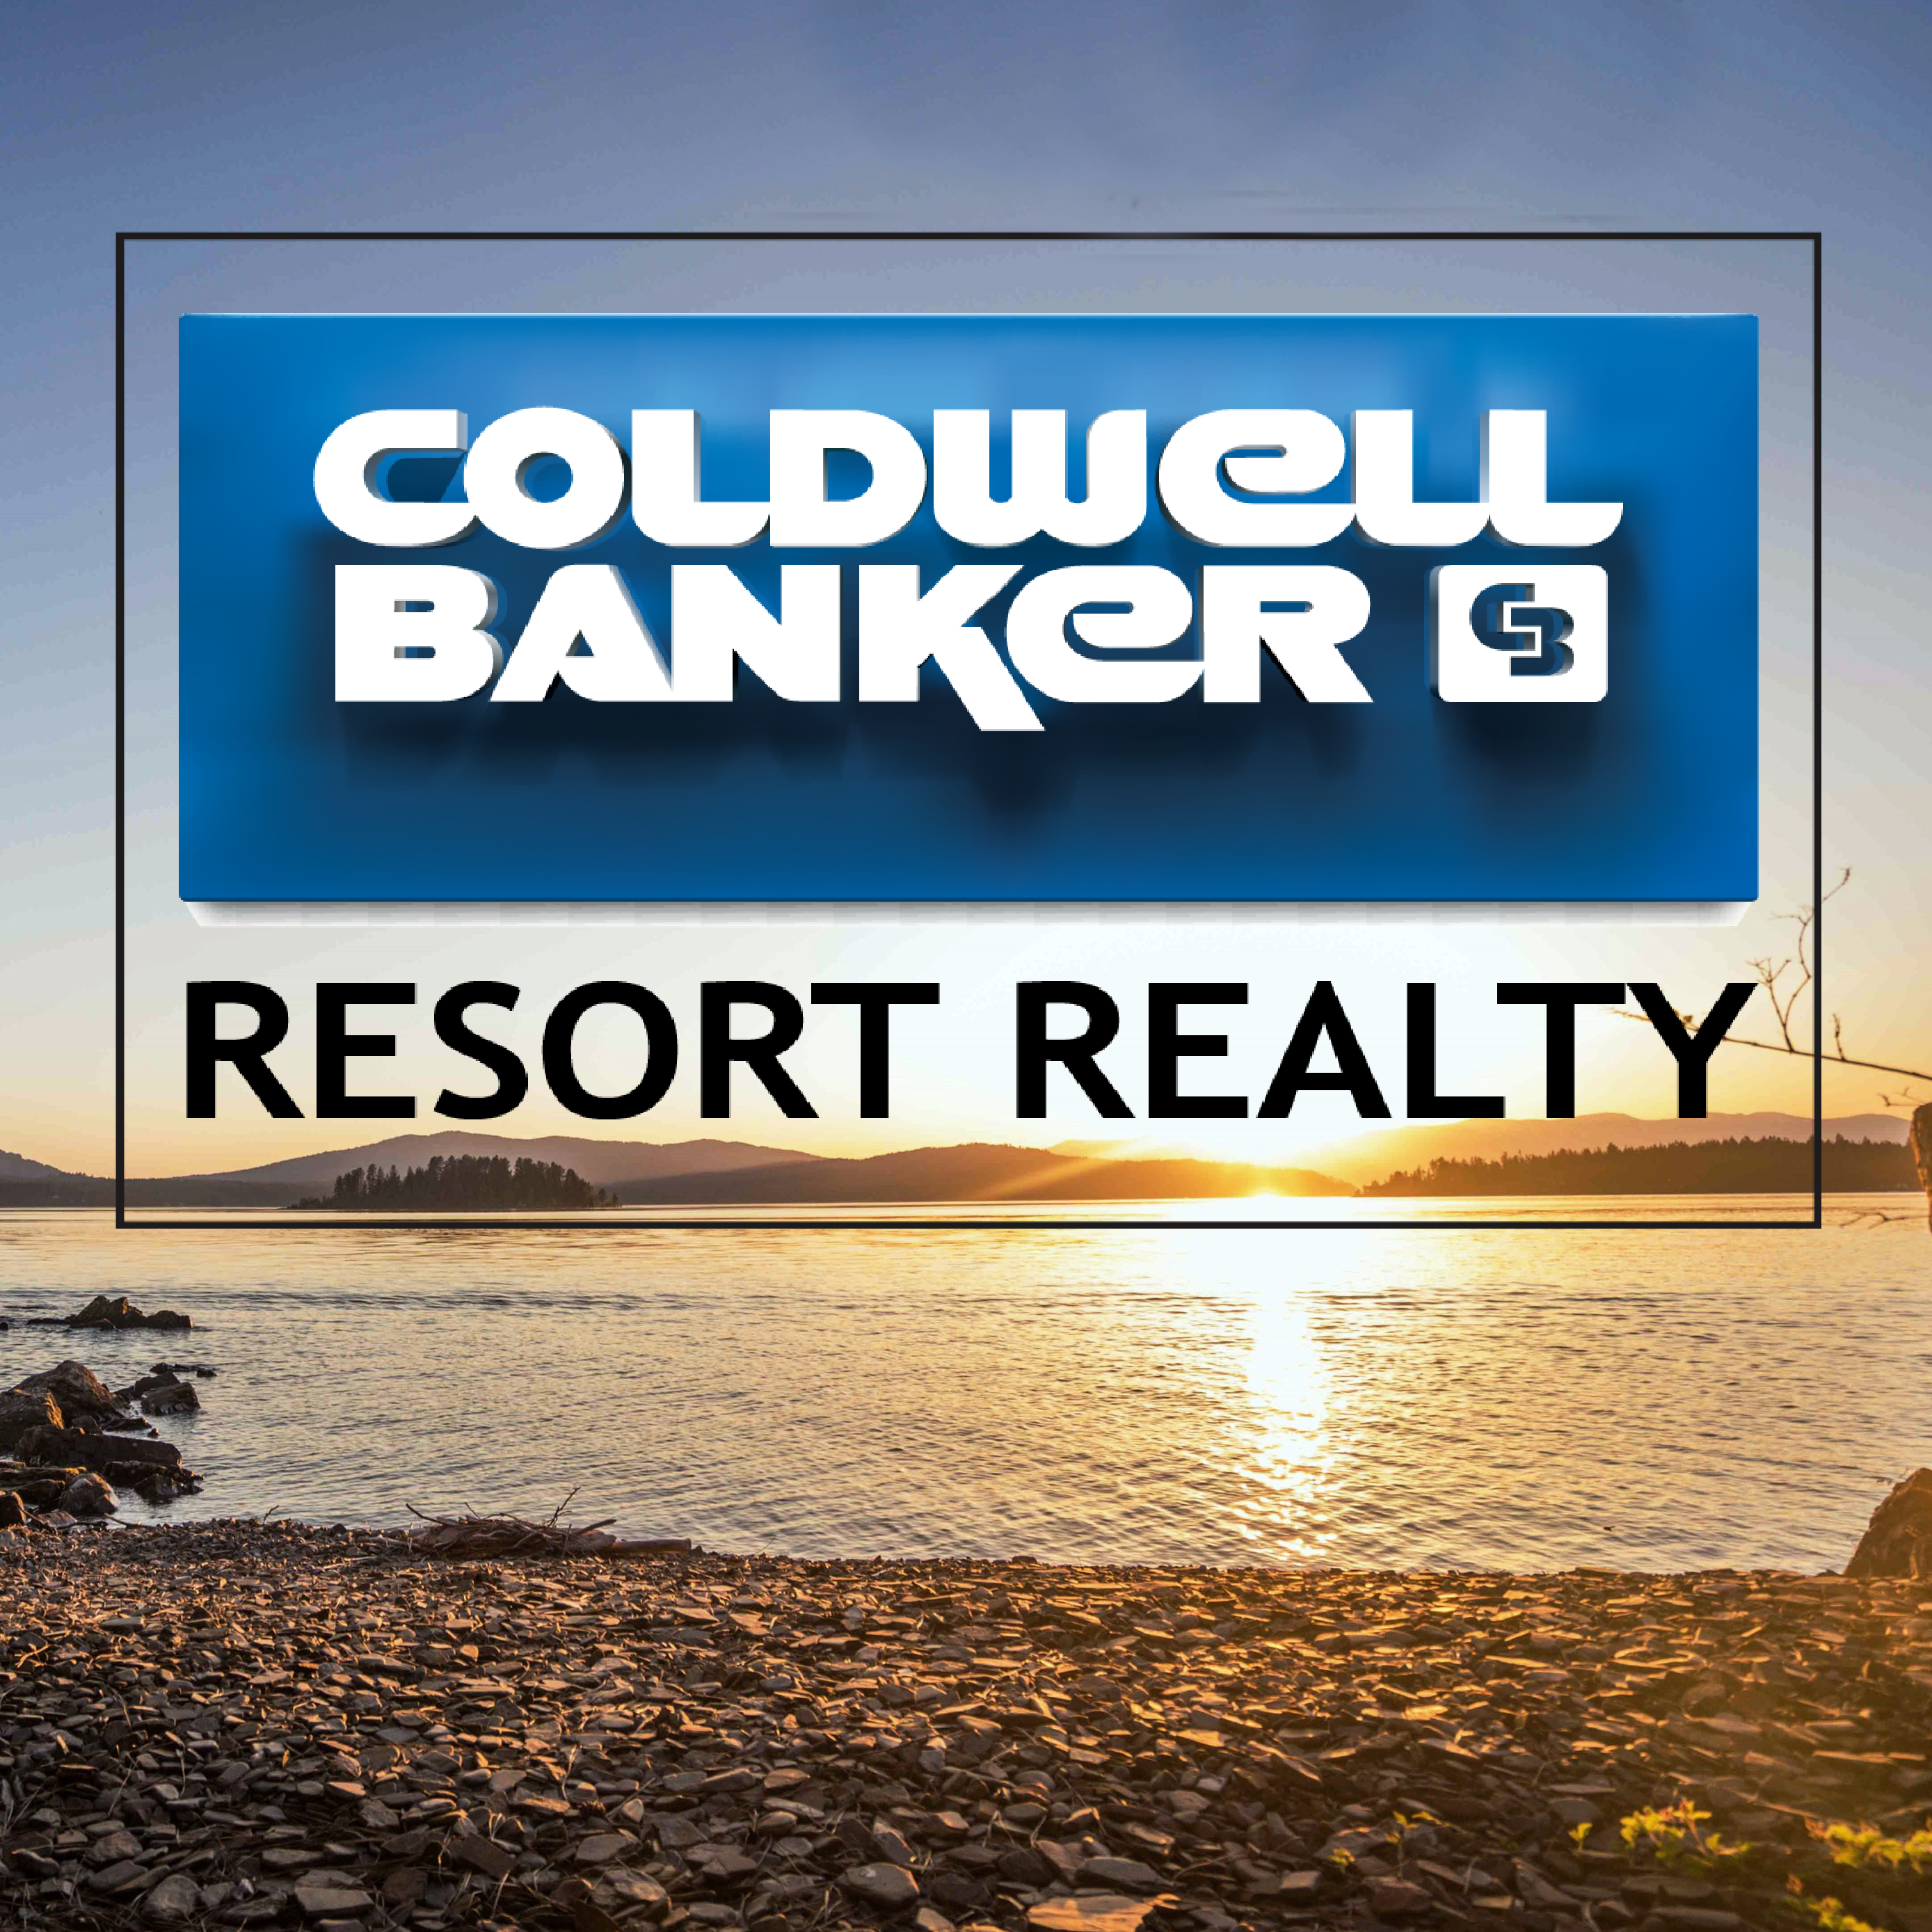 Coldwell Banker Resort Realty | 202 N Forest Ave, Sandpoint, ID, 83864 | +1 (208) 263-6802